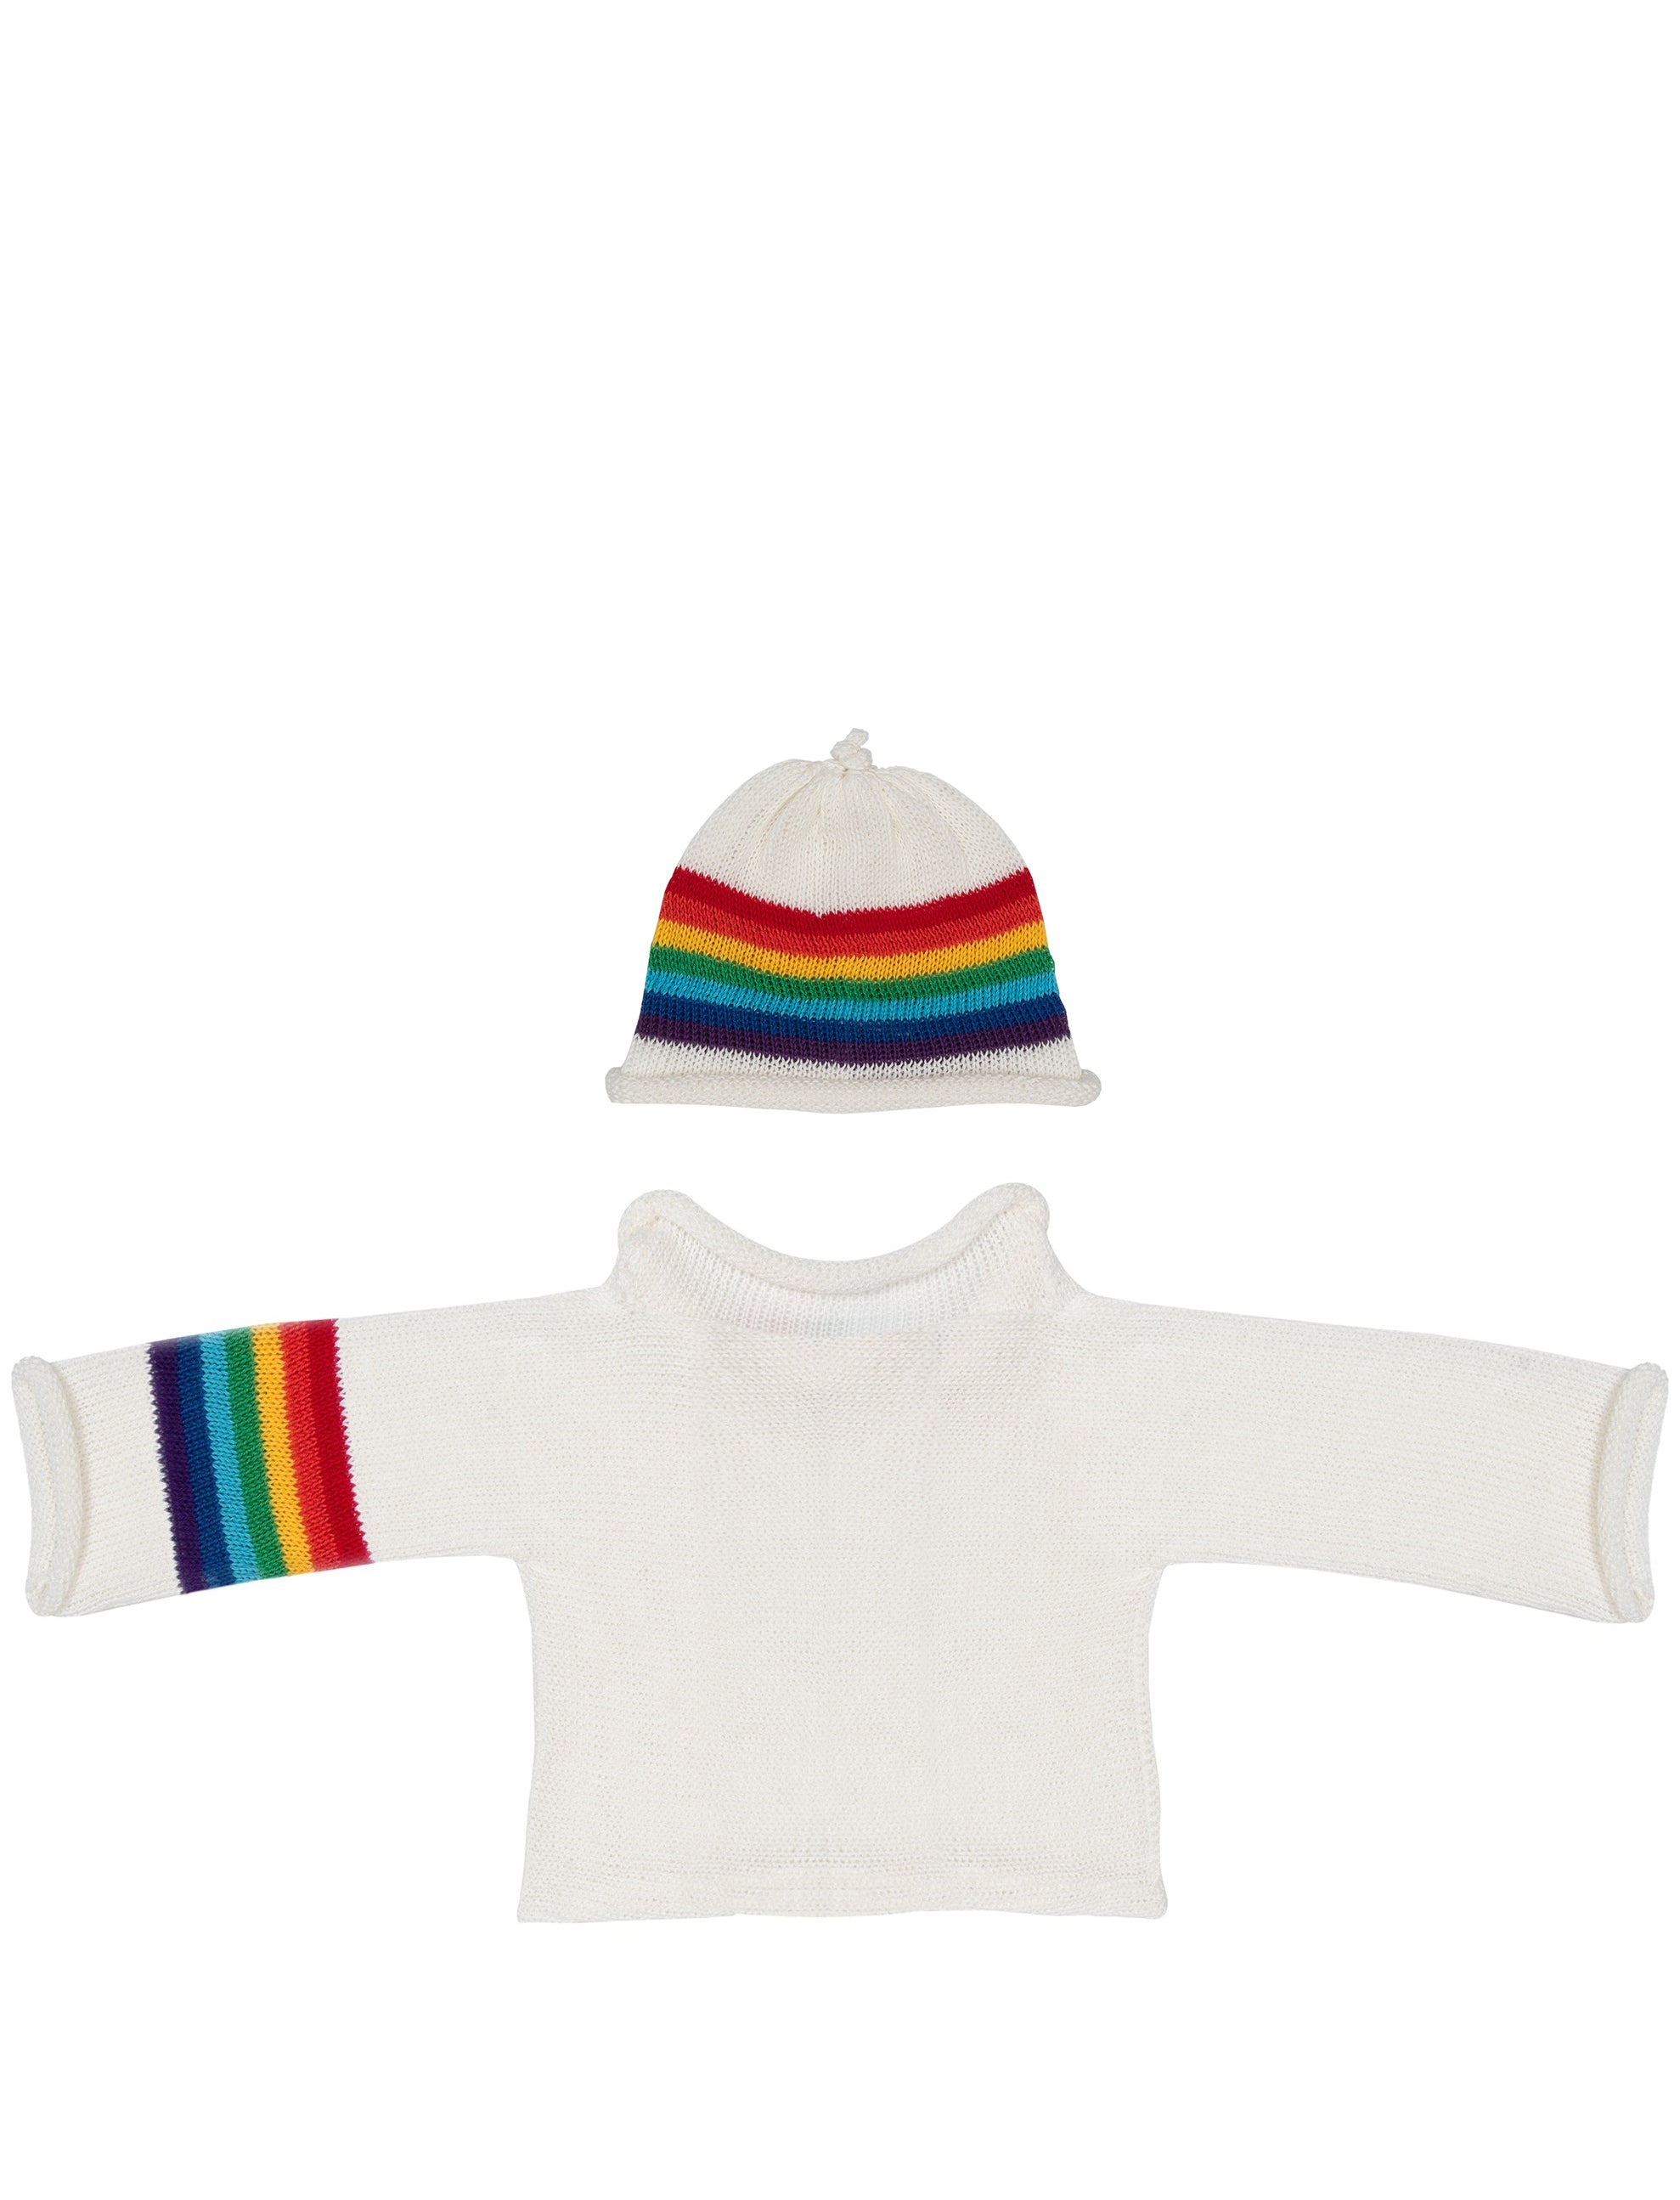 Anita's House Rainbow Jumper and Hat